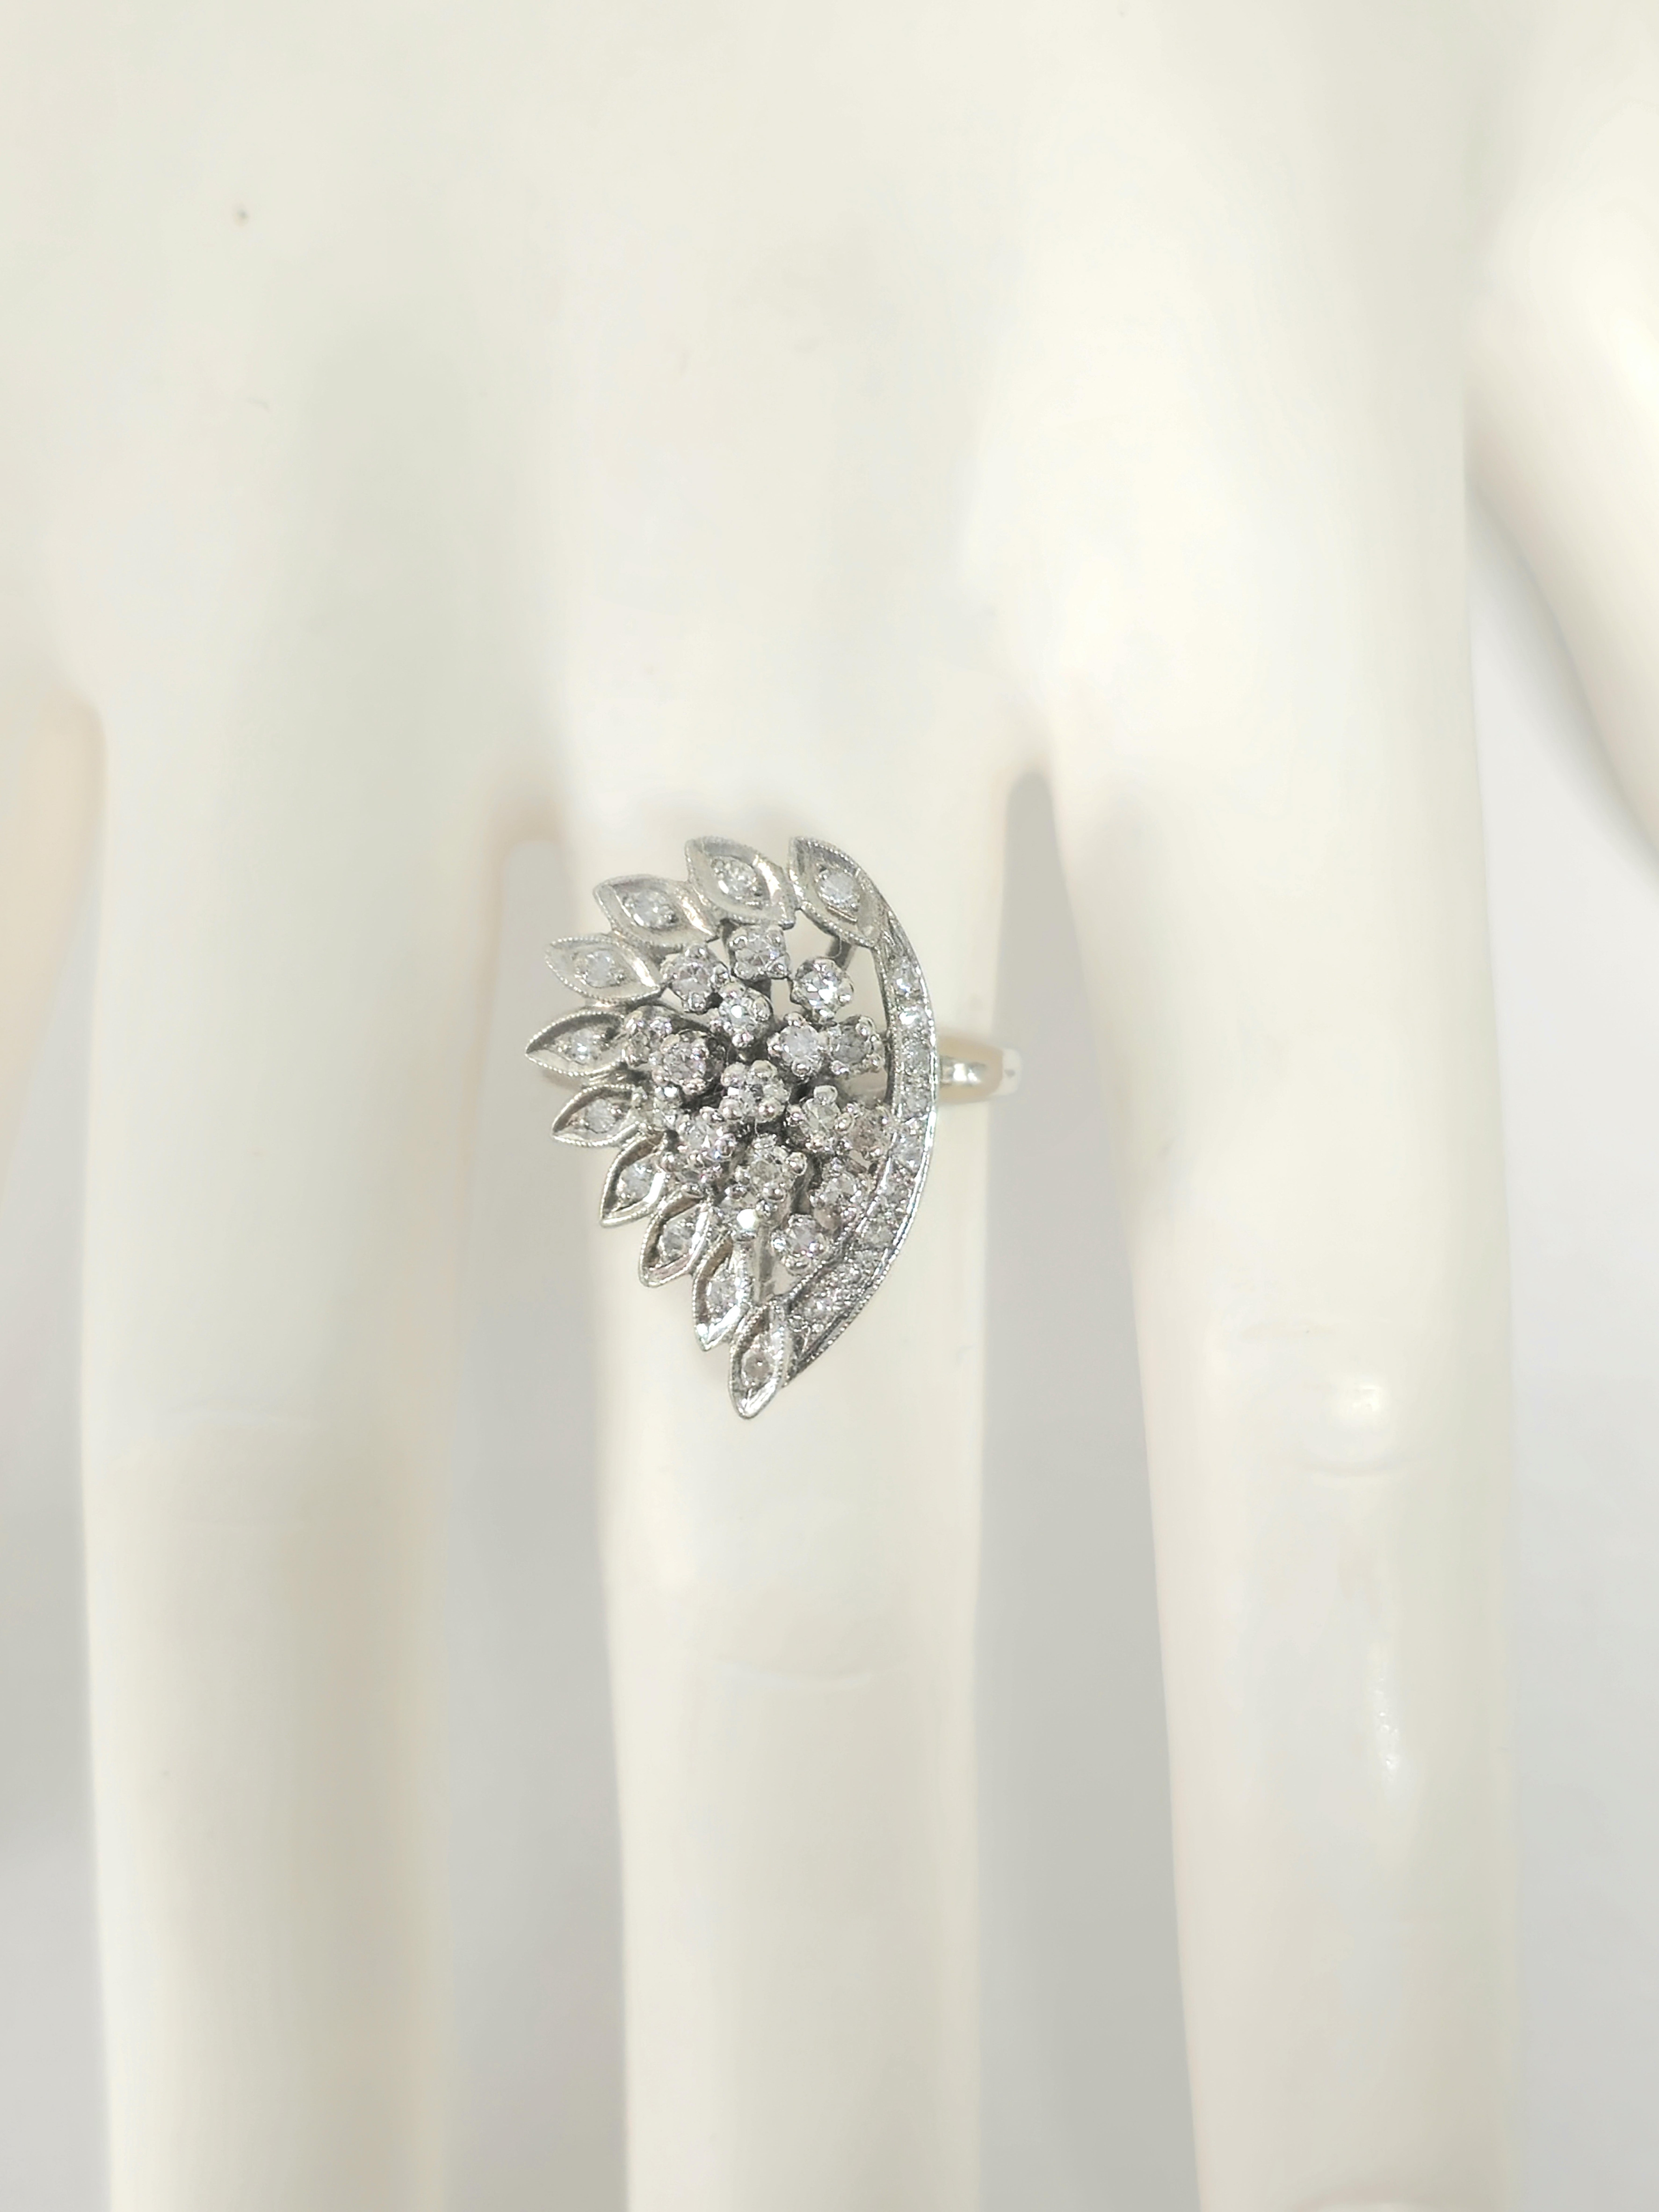 Late 20th Century Wing Motif 14k White Gold Diamond Engagement Ring  In Excellent Condition For Sale In Miami, FL